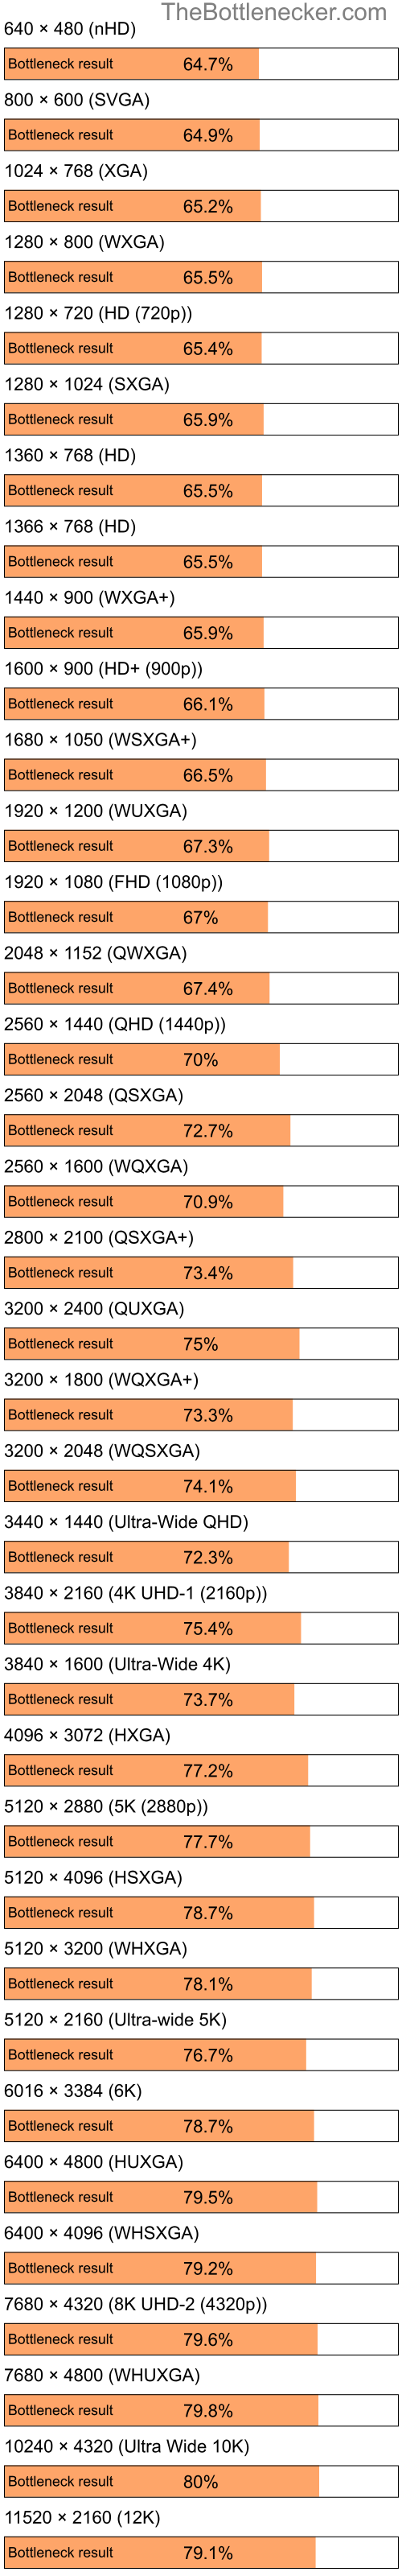 Bottleneck results by resolution for Intel Pentium 4 and AMD Mobility Radeon 4100 in General Tasks